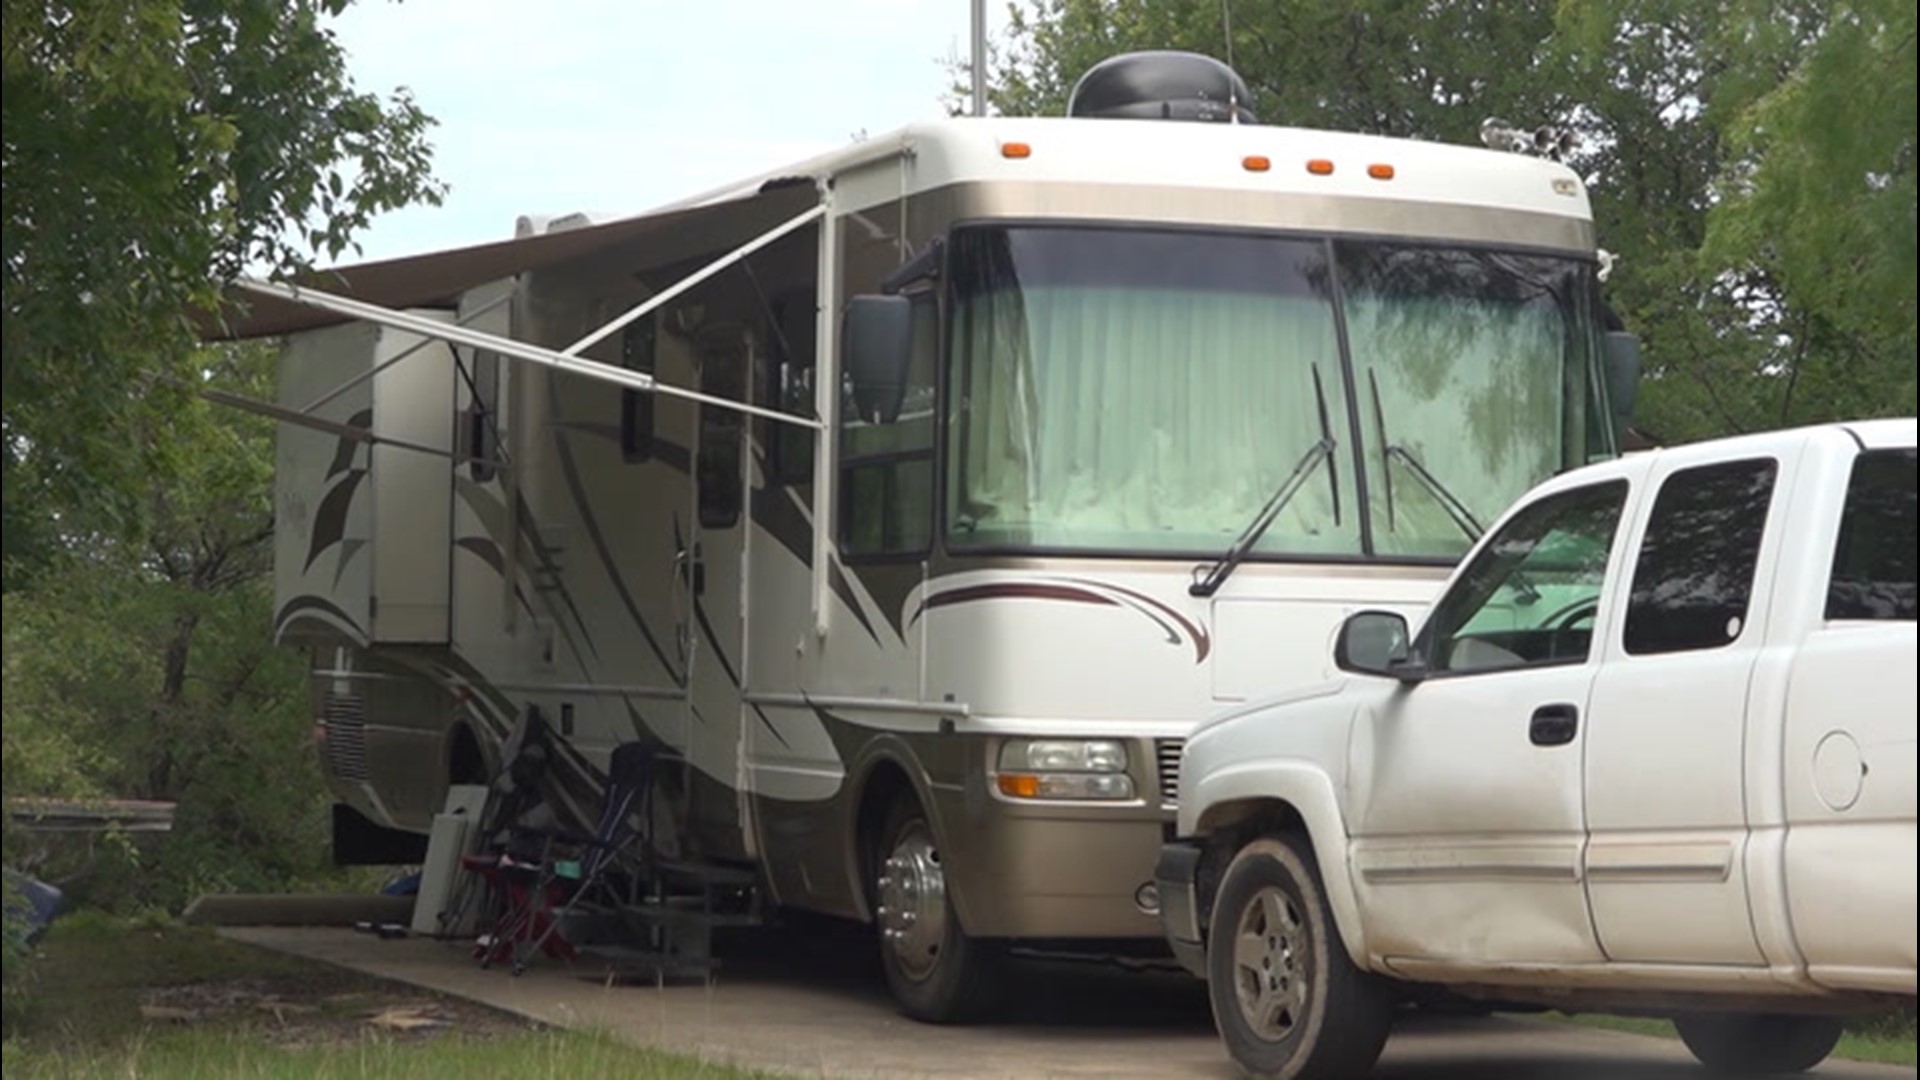 Many families are canceling or changing vacation plans because of the COVID-19 pandemic. The RV rental business is seeing a big boost in demand.